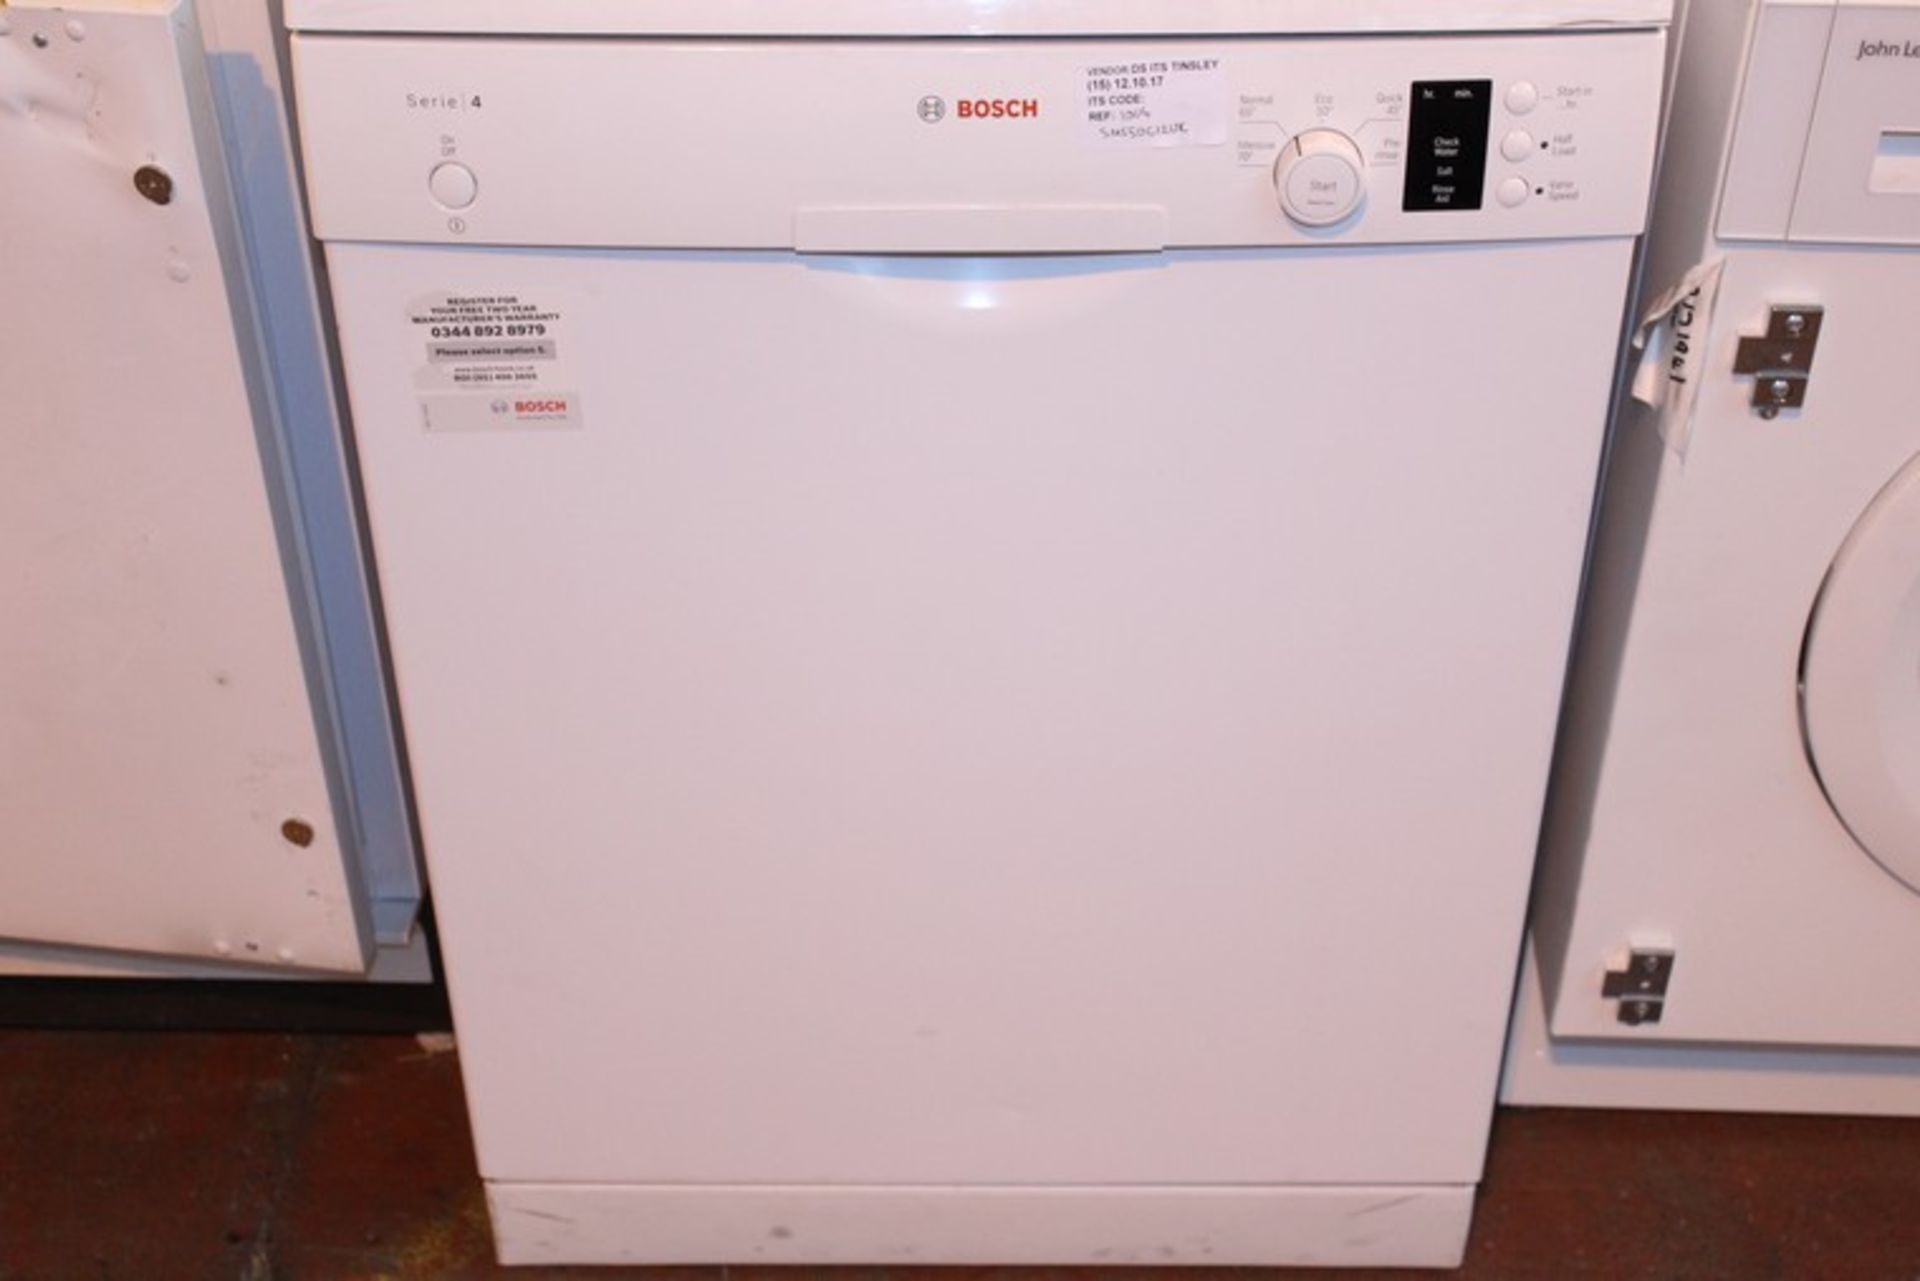 1 x BOSCH SMS50C12UK DISH WASHER IN WHITE (12/10/17) (1004) *PLEASE NOTE THAT THE BID PRICE IS